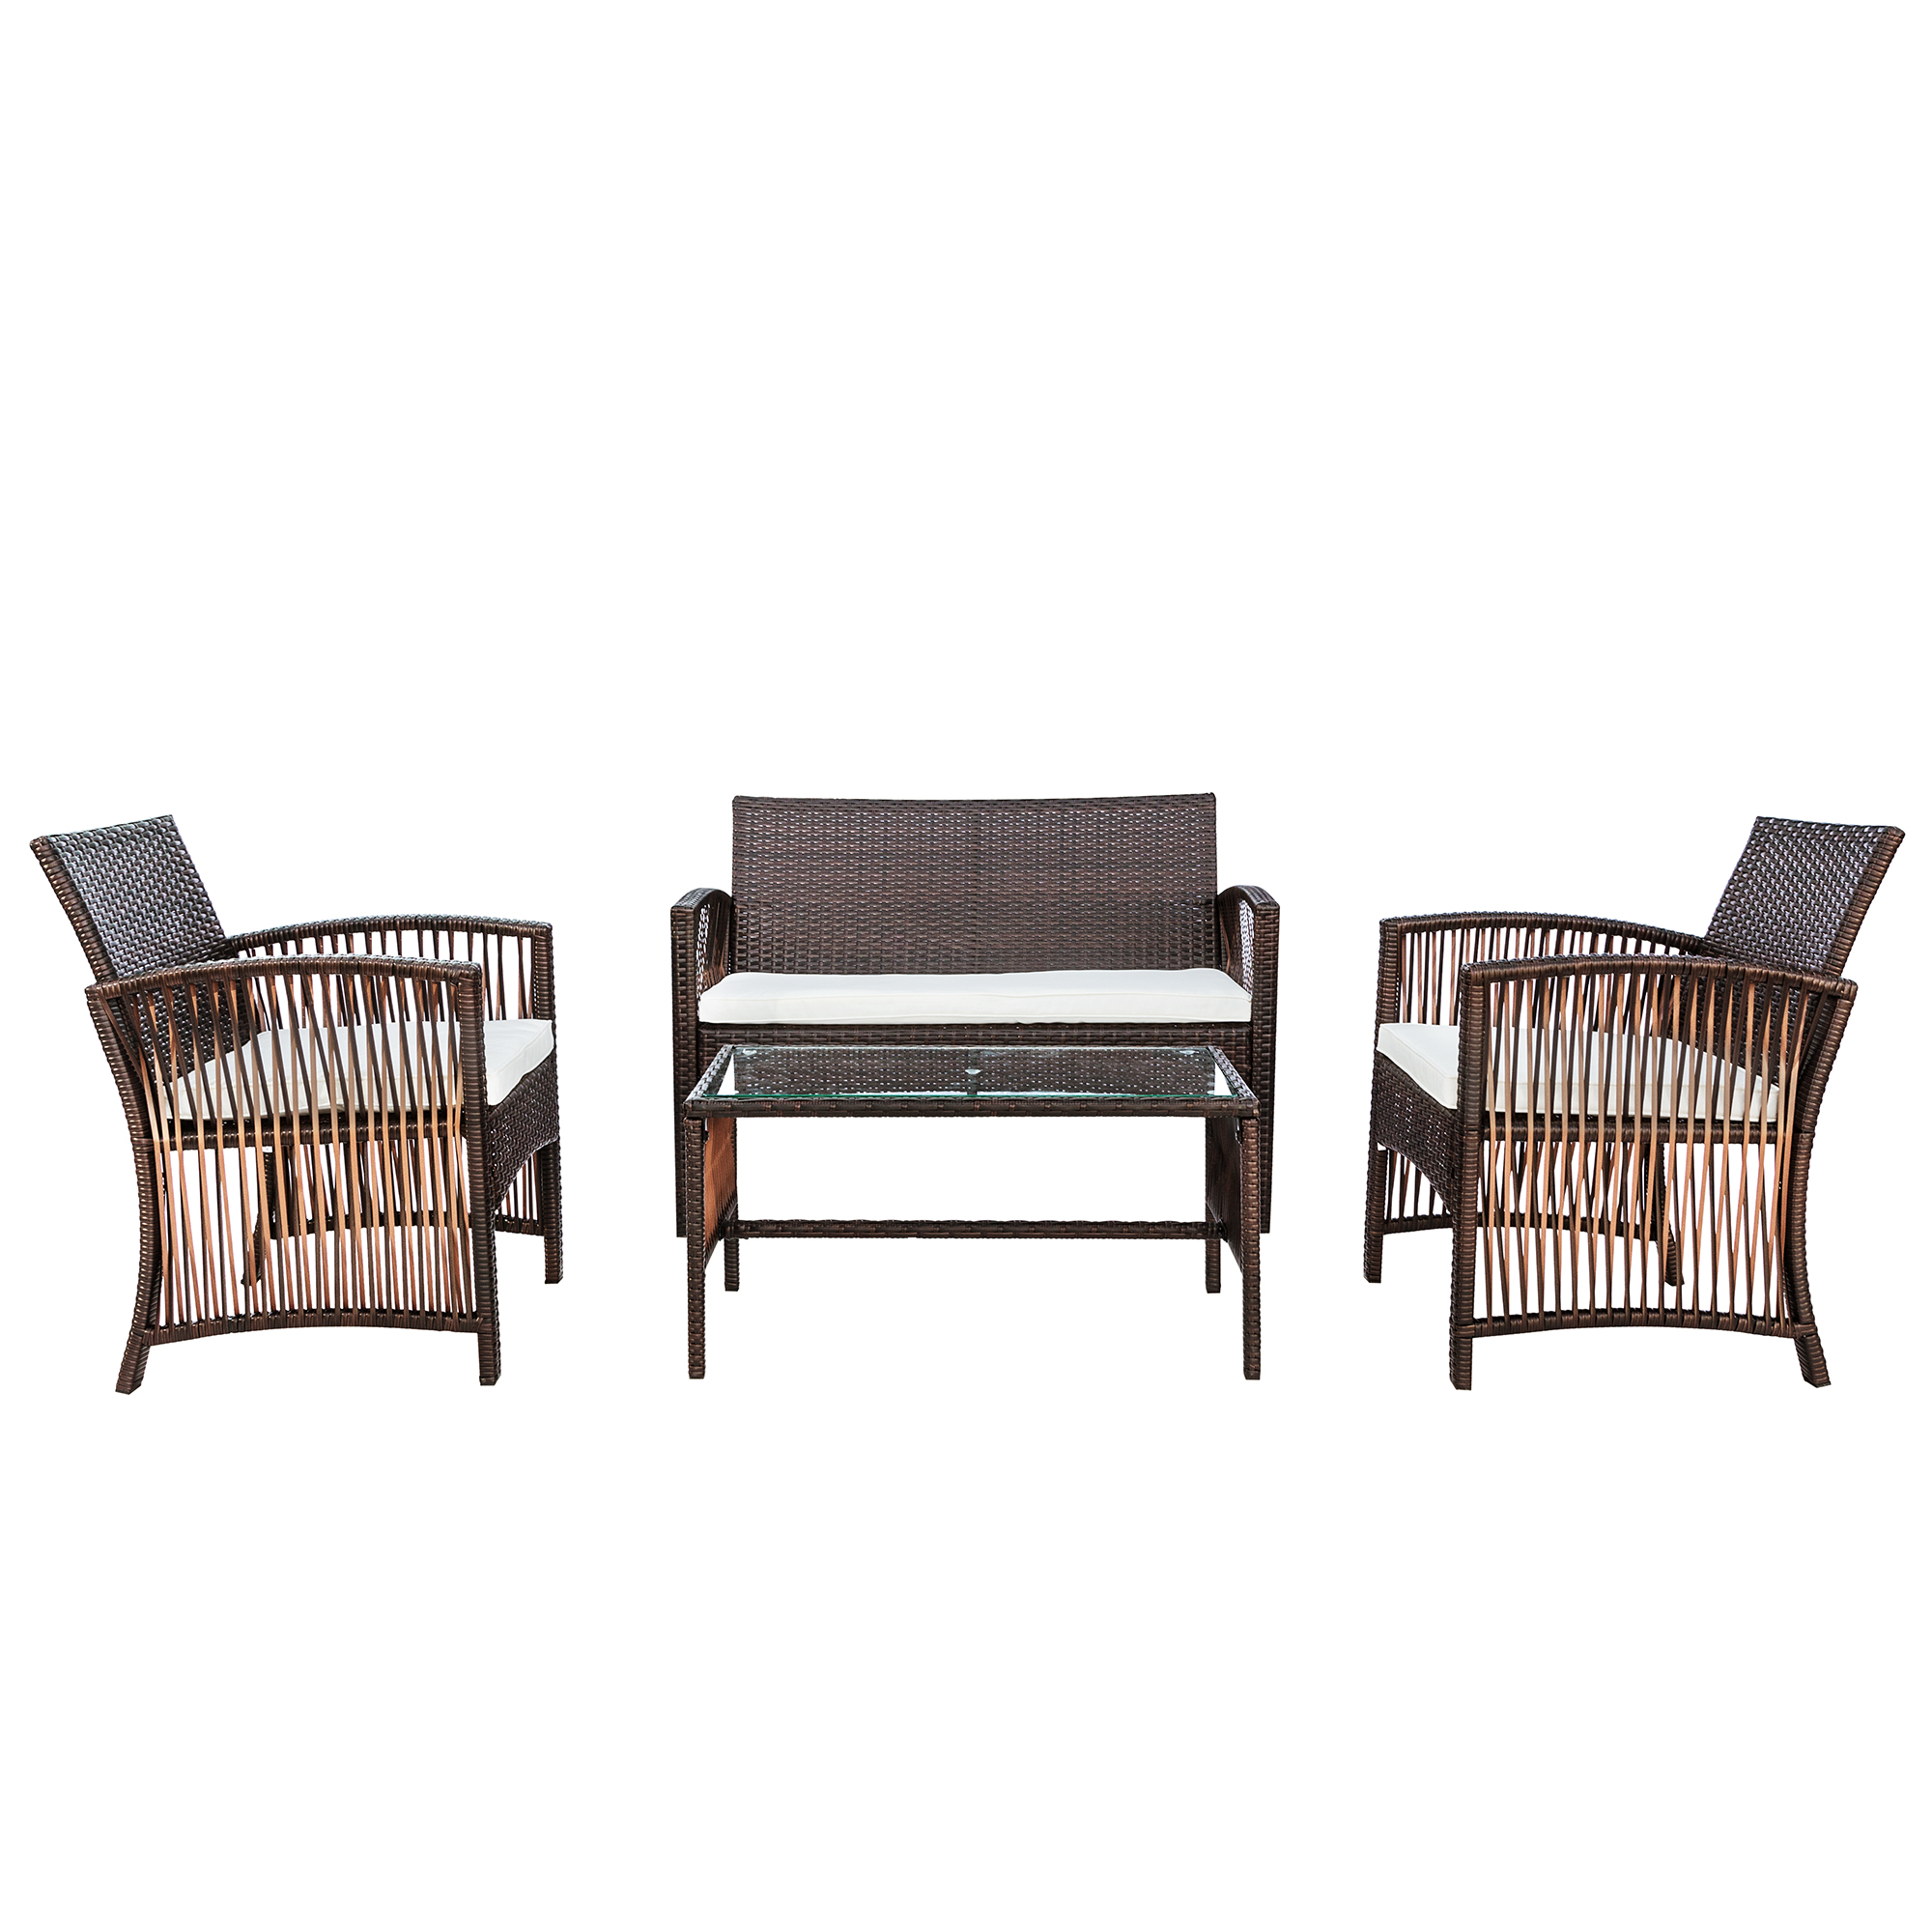 Outdoor Patio Furniture Sets, 4 Piece Brown Wicker Outdoor Porch Conversation Sets, 2pcs Arm Chairs, 1pc Loveseat&Coffee Table, Patio Bar Set, Dining Set for Backyard Lawn Porch Poolside Garden, W7755 - image 5 of 12